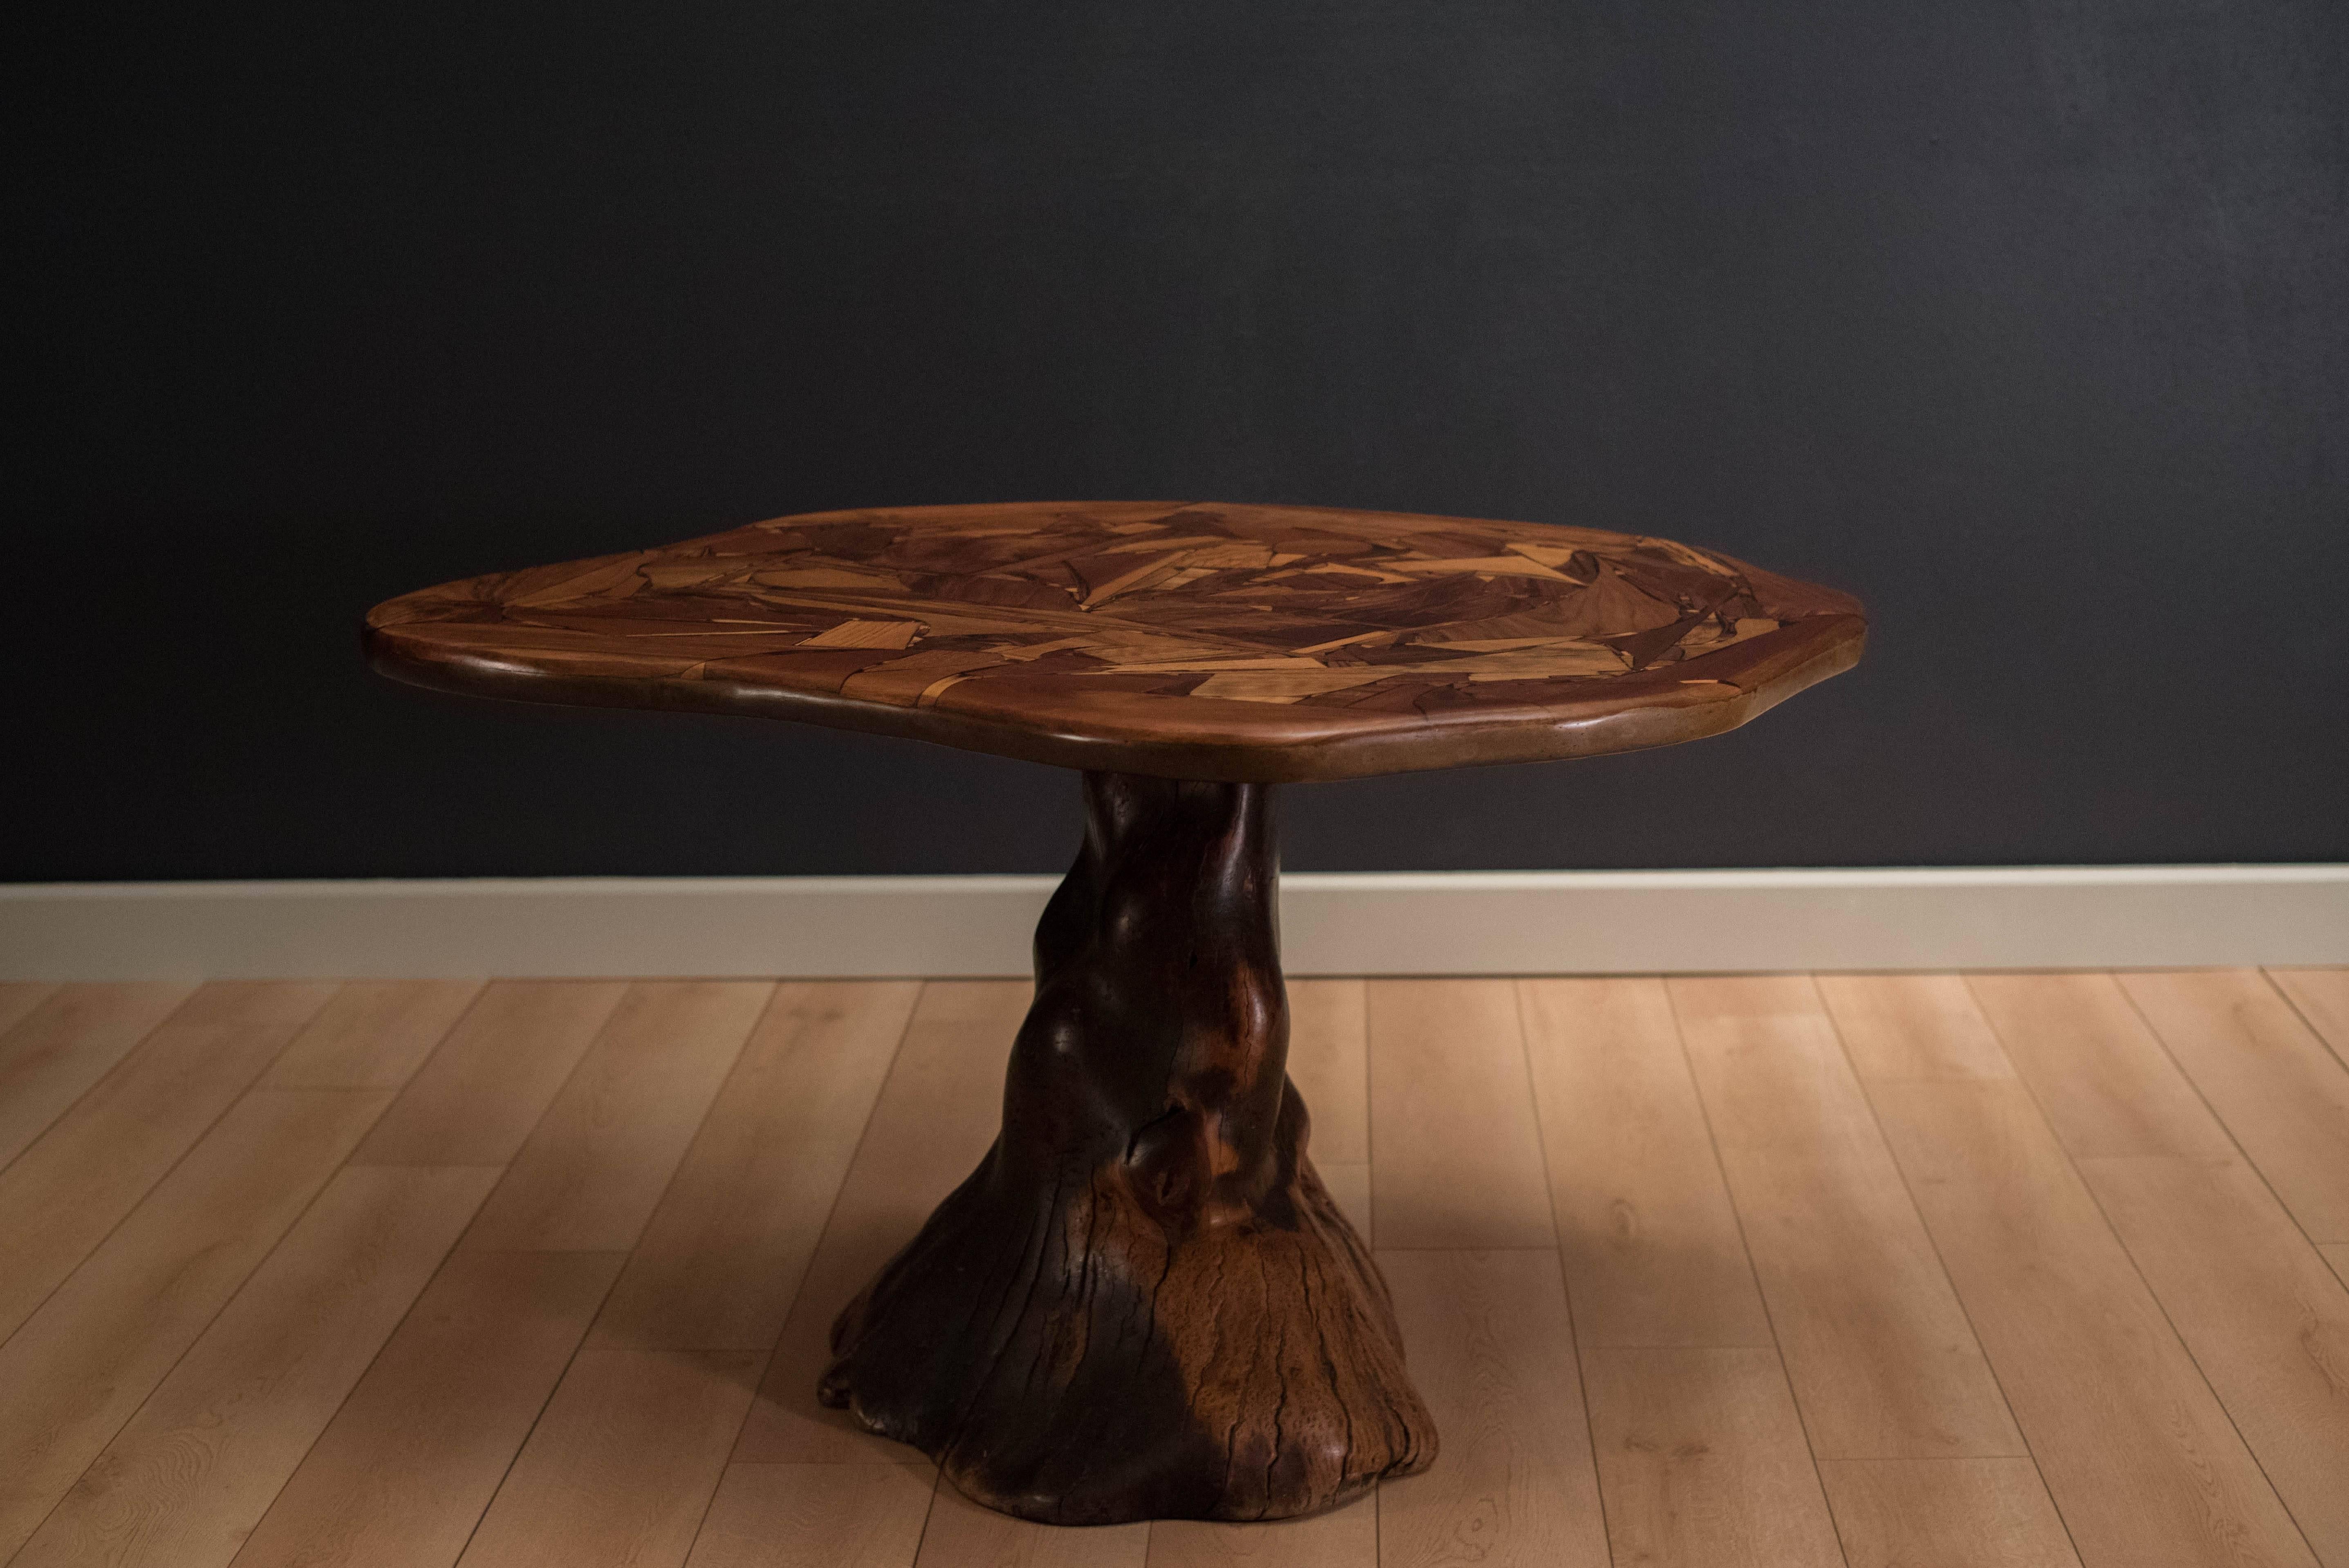 Mid-Century studio craft solid dining table. This free-form top displays a beautiful mosaic pattern of walnut, oak, mahogany and koa wood. Each wood piece is held together by resin and clear epoxy making an organic shape. Top rests upon a solid